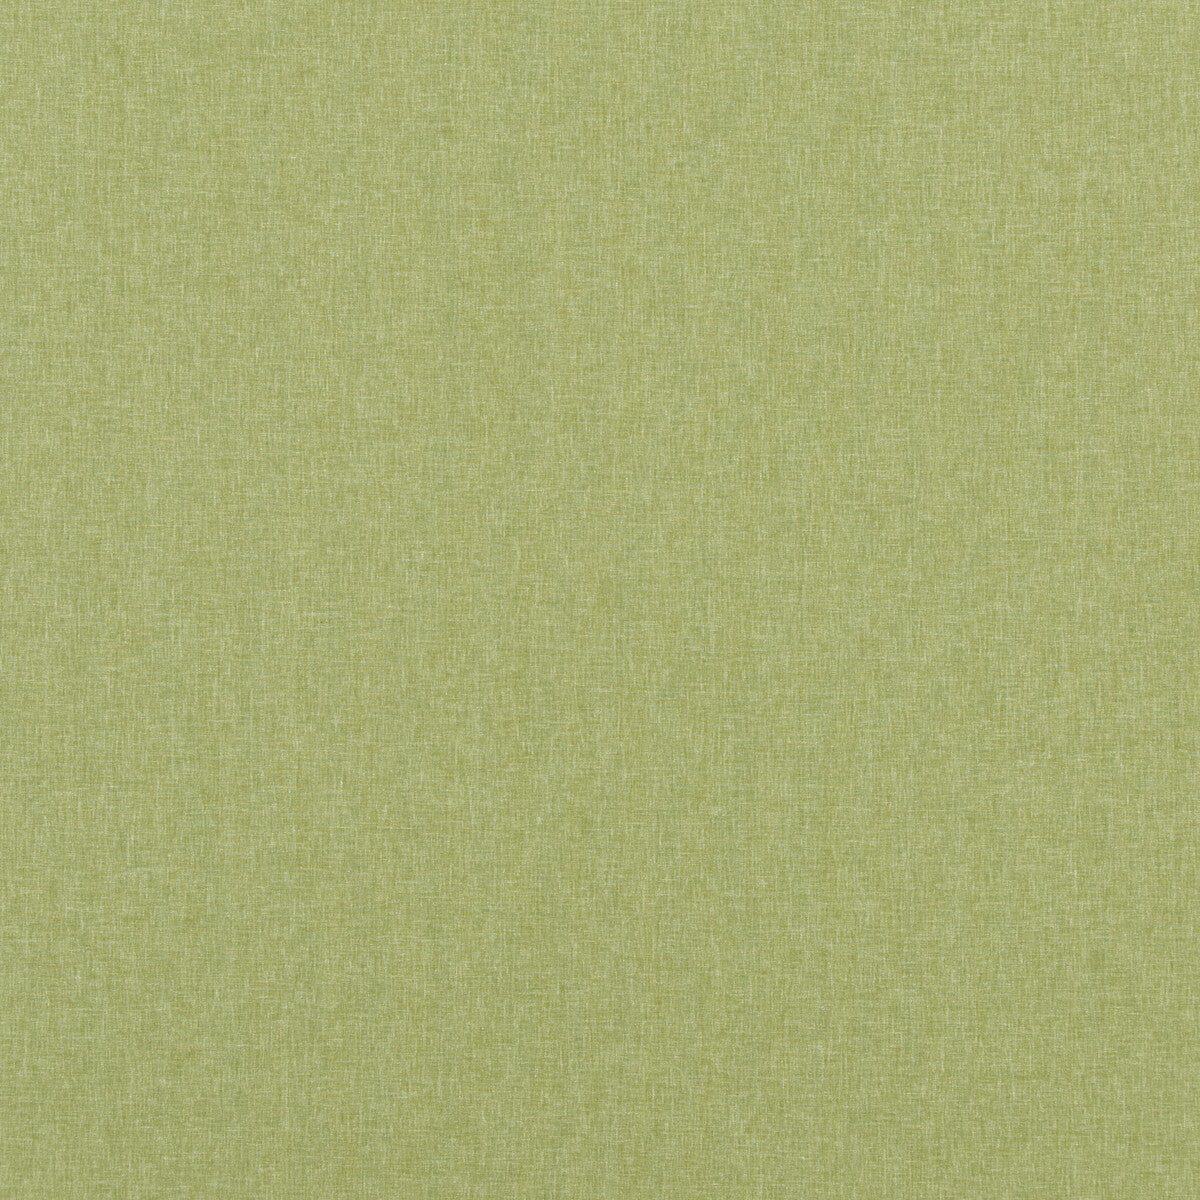 Carnival Plain fabric in grass color - pattern PF50420.735.0 - by Baker Lifestyle in the Carnival collection